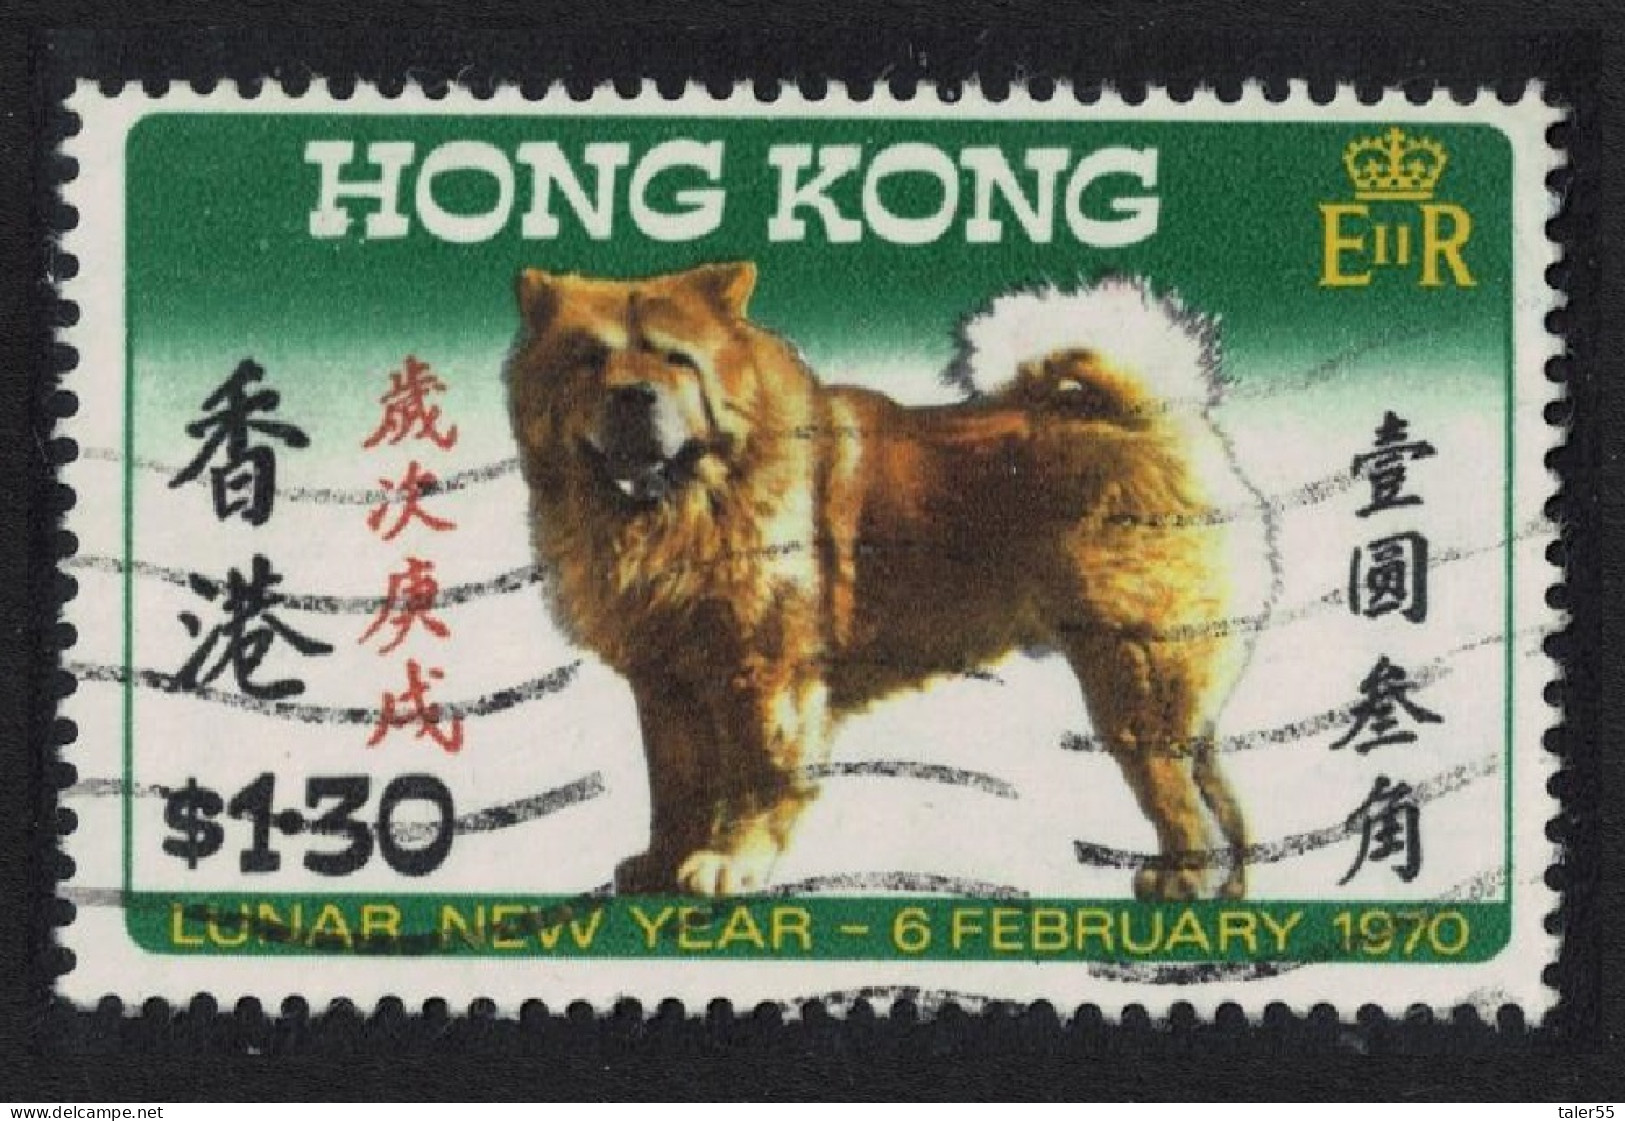 Hong Kong Chinese New Year. Year Of The Dog $1.30 1970 Canc SG#262 - Oblitérés